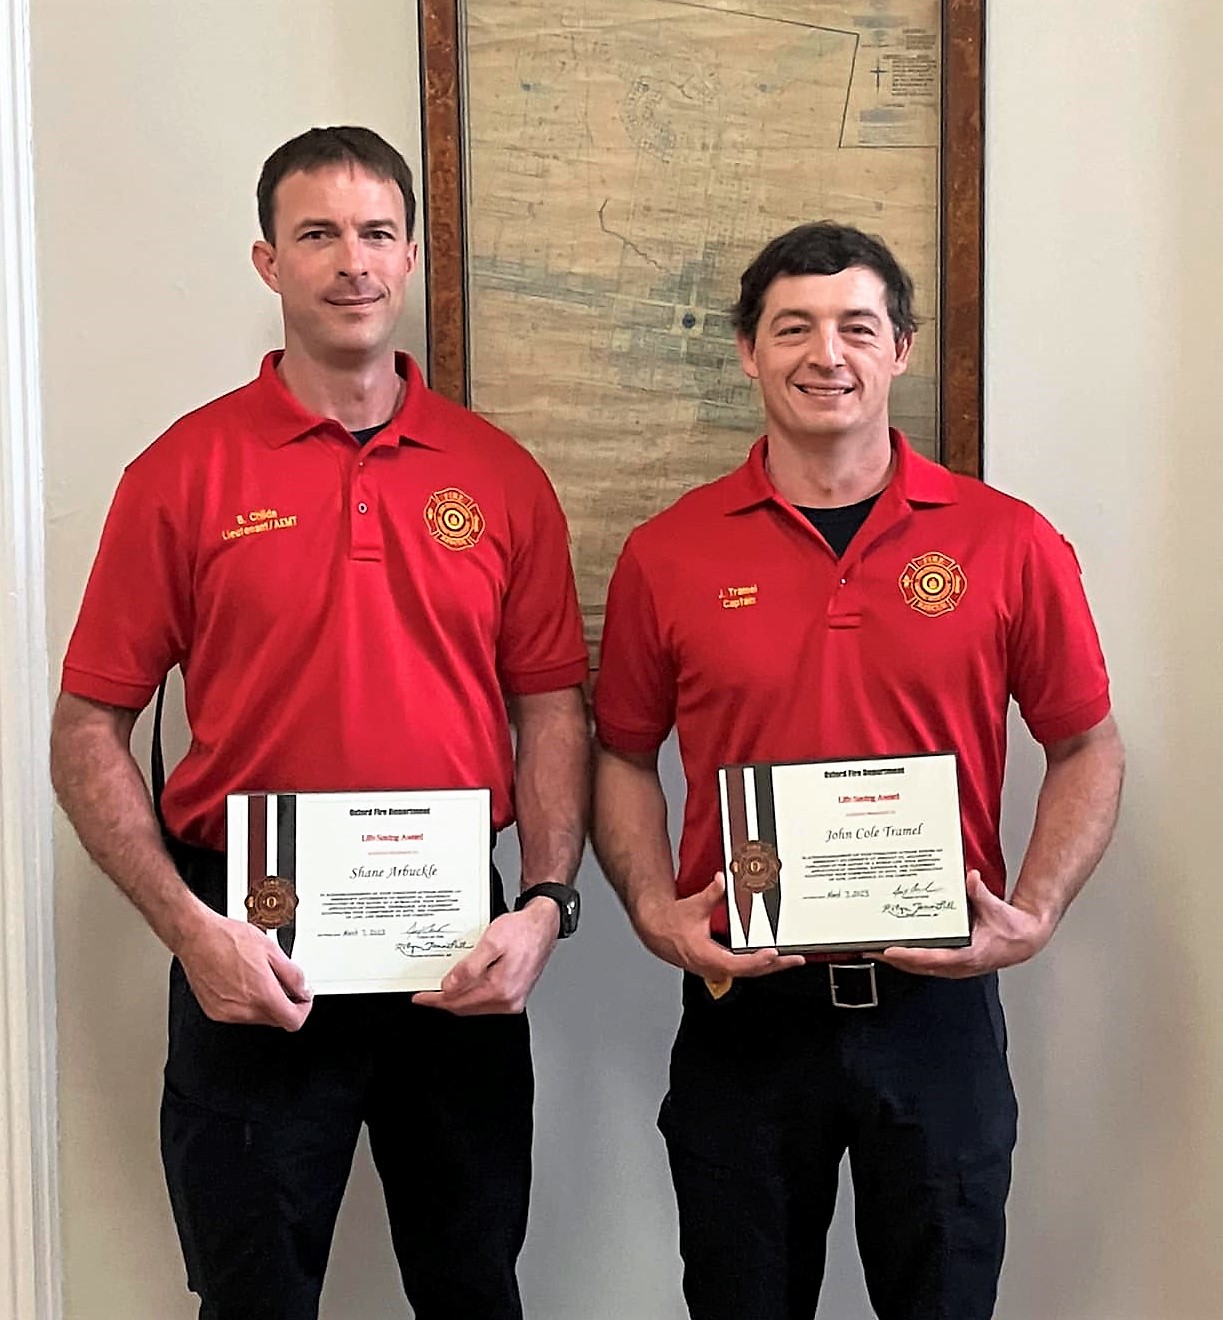 Three Firefighters/EMTs Receive Life Saver Award for Saving a